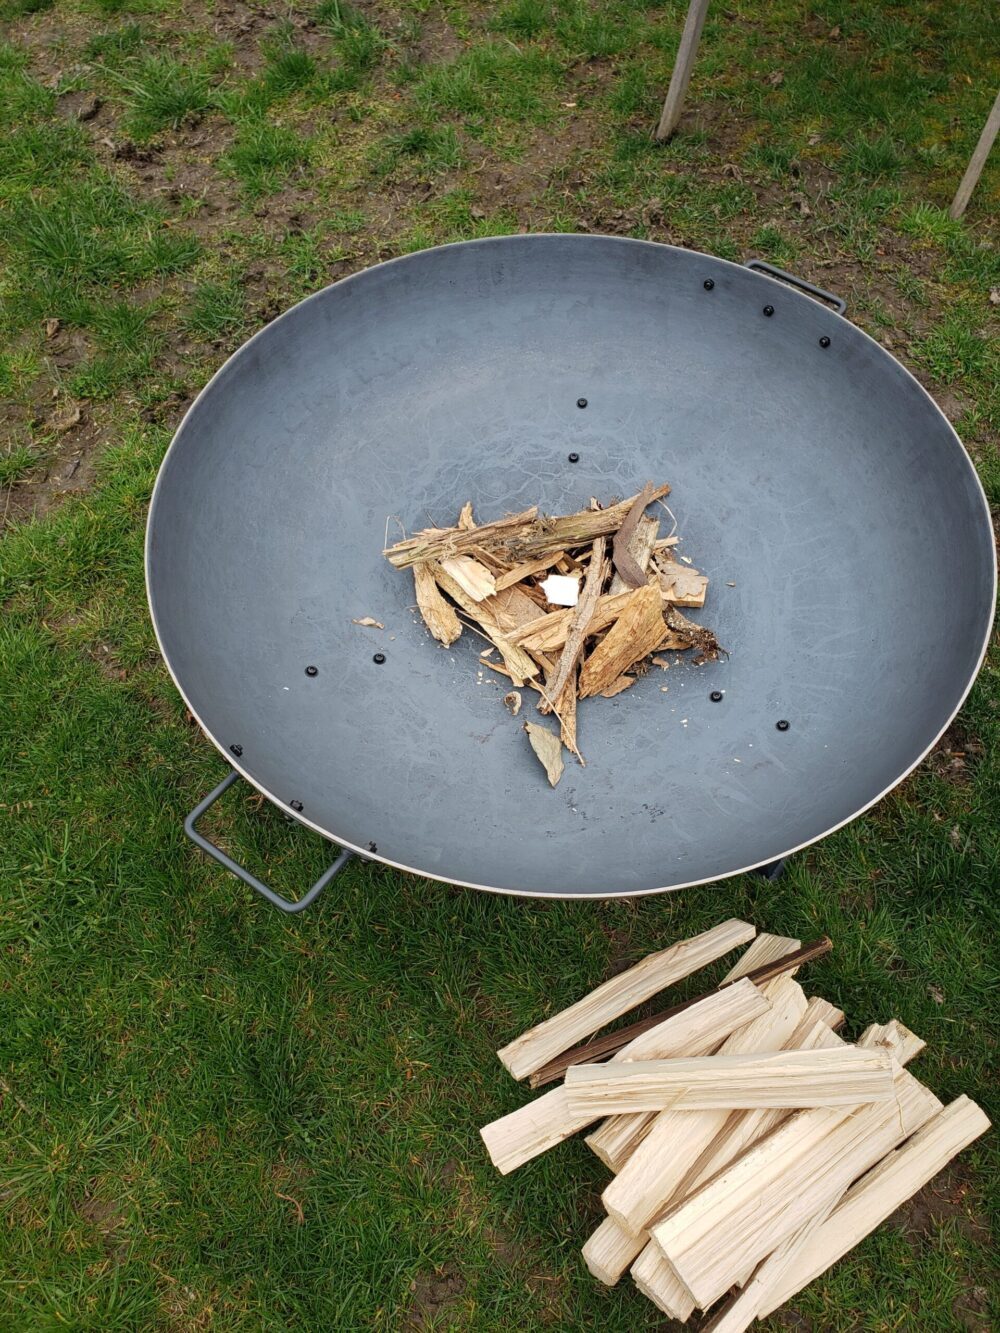 How To Start A Fire In Pit, Best Way To Start A Fire In A Fire Pit